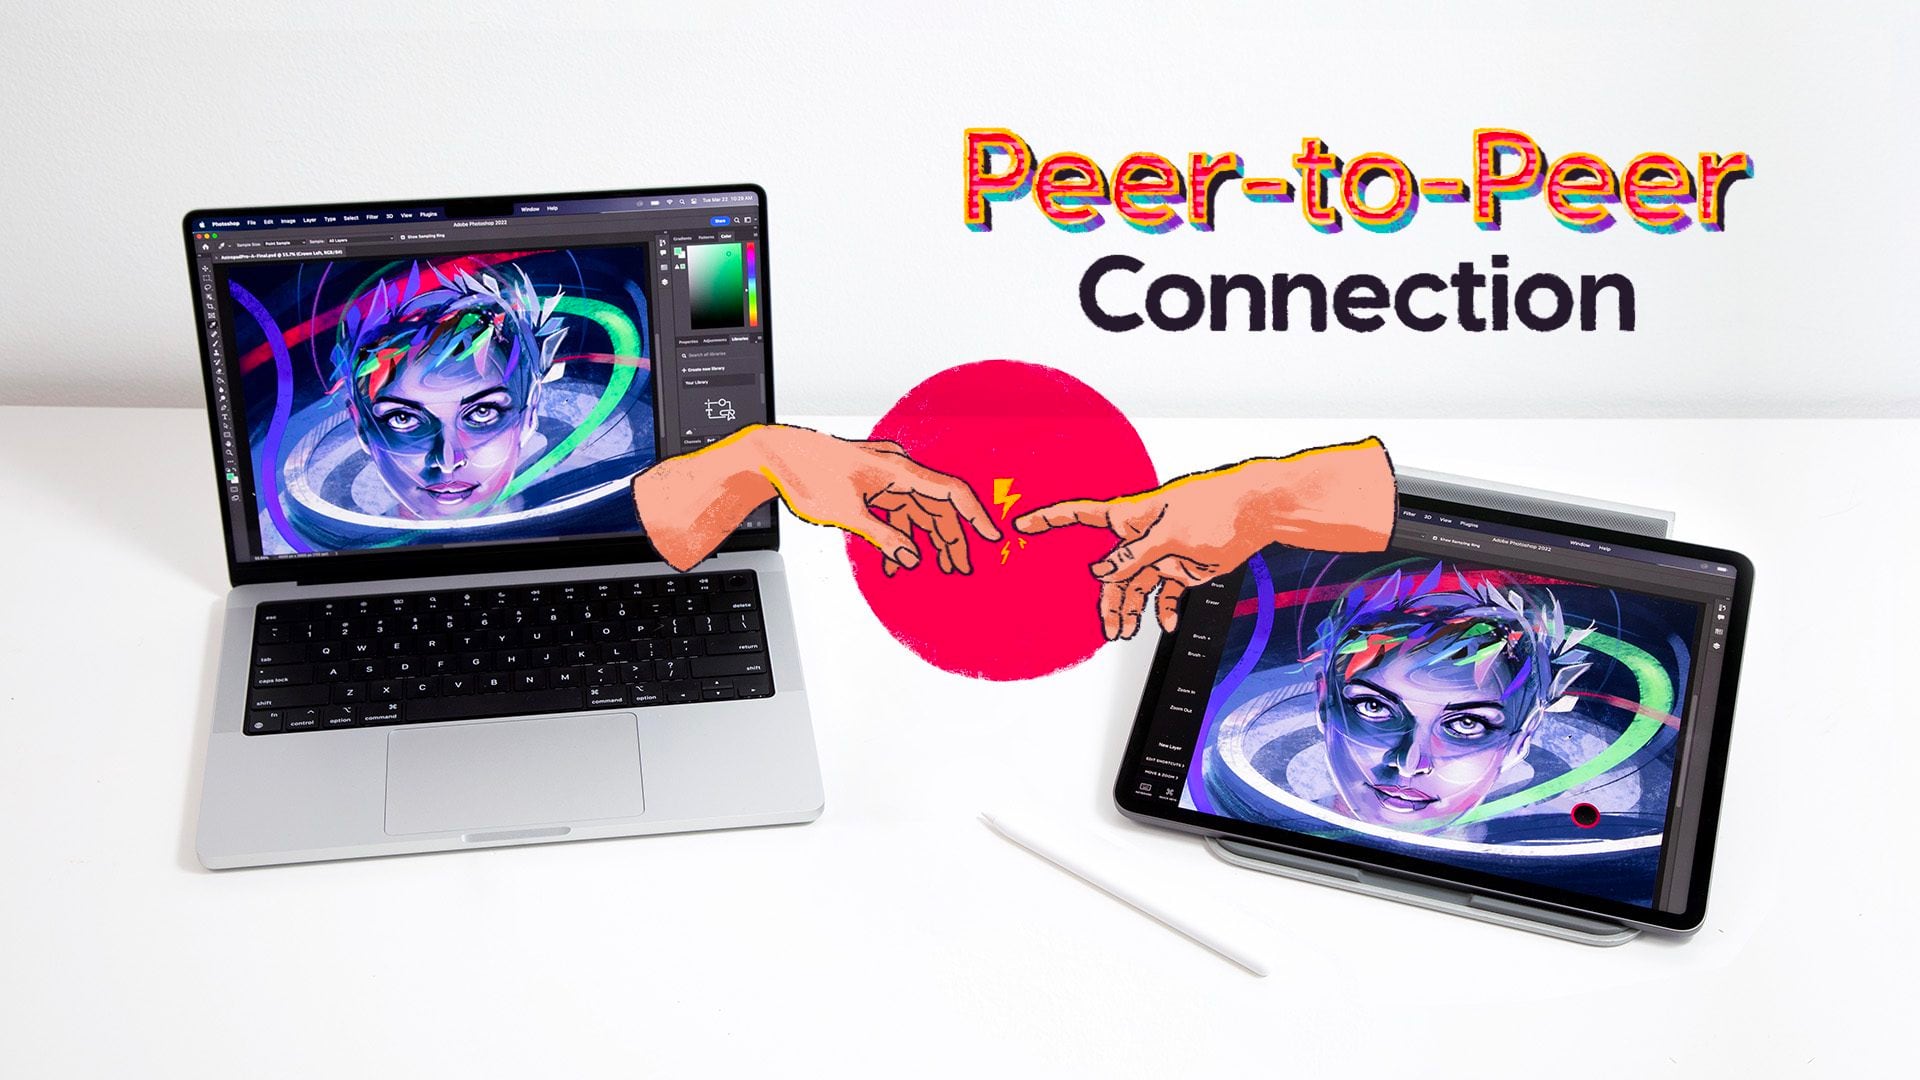 Astropad Studio Gains Peer-to-Peer Networking for Faster Wireless Connection Between iPad and Mac